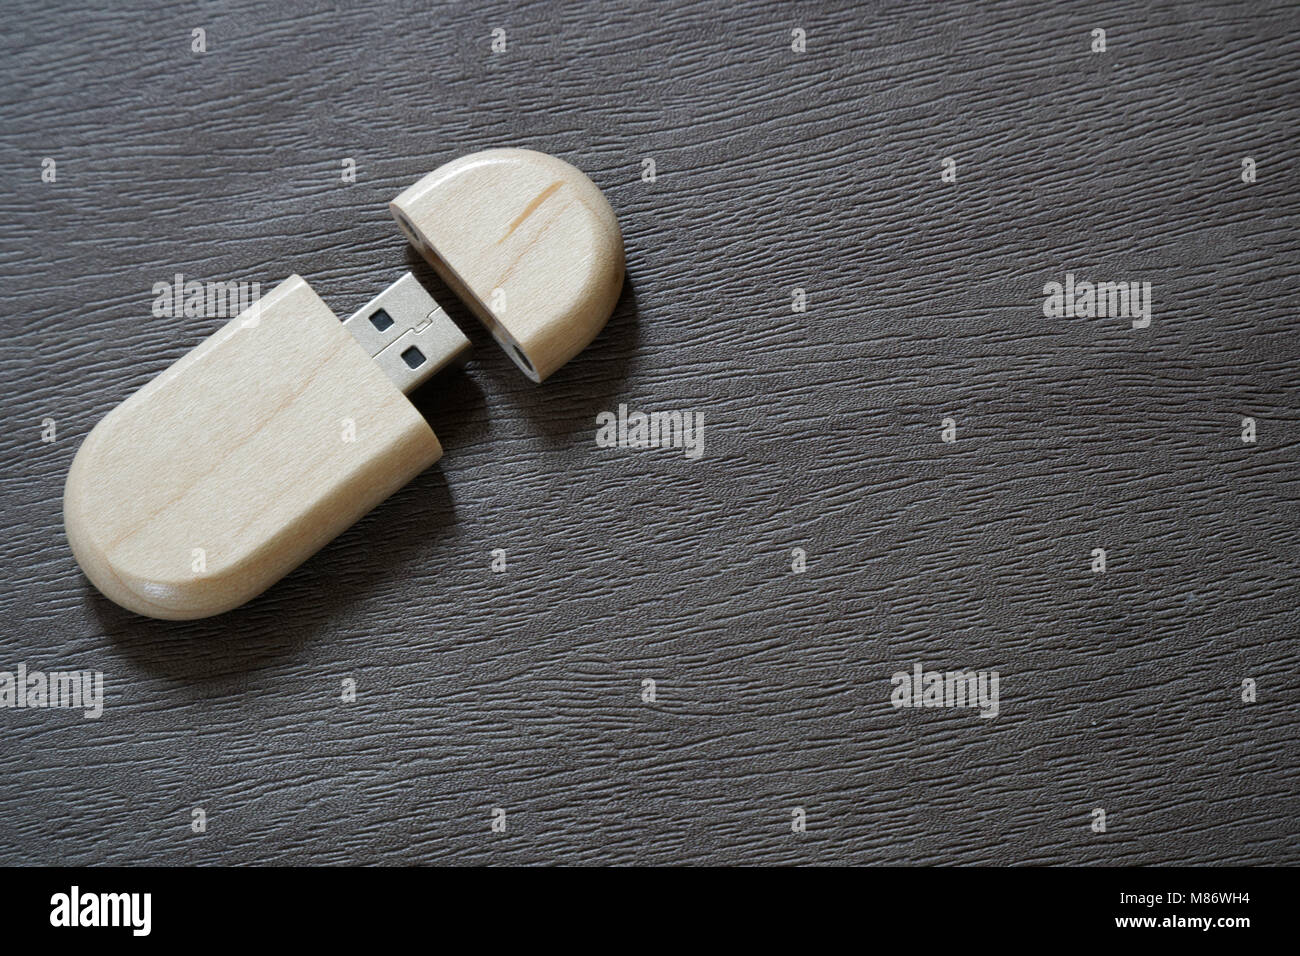 Usb flash drive with wooden surface on desk for USB port plug-in computer  laptop for transfer data and backup business concept Stock Photo - Alamy